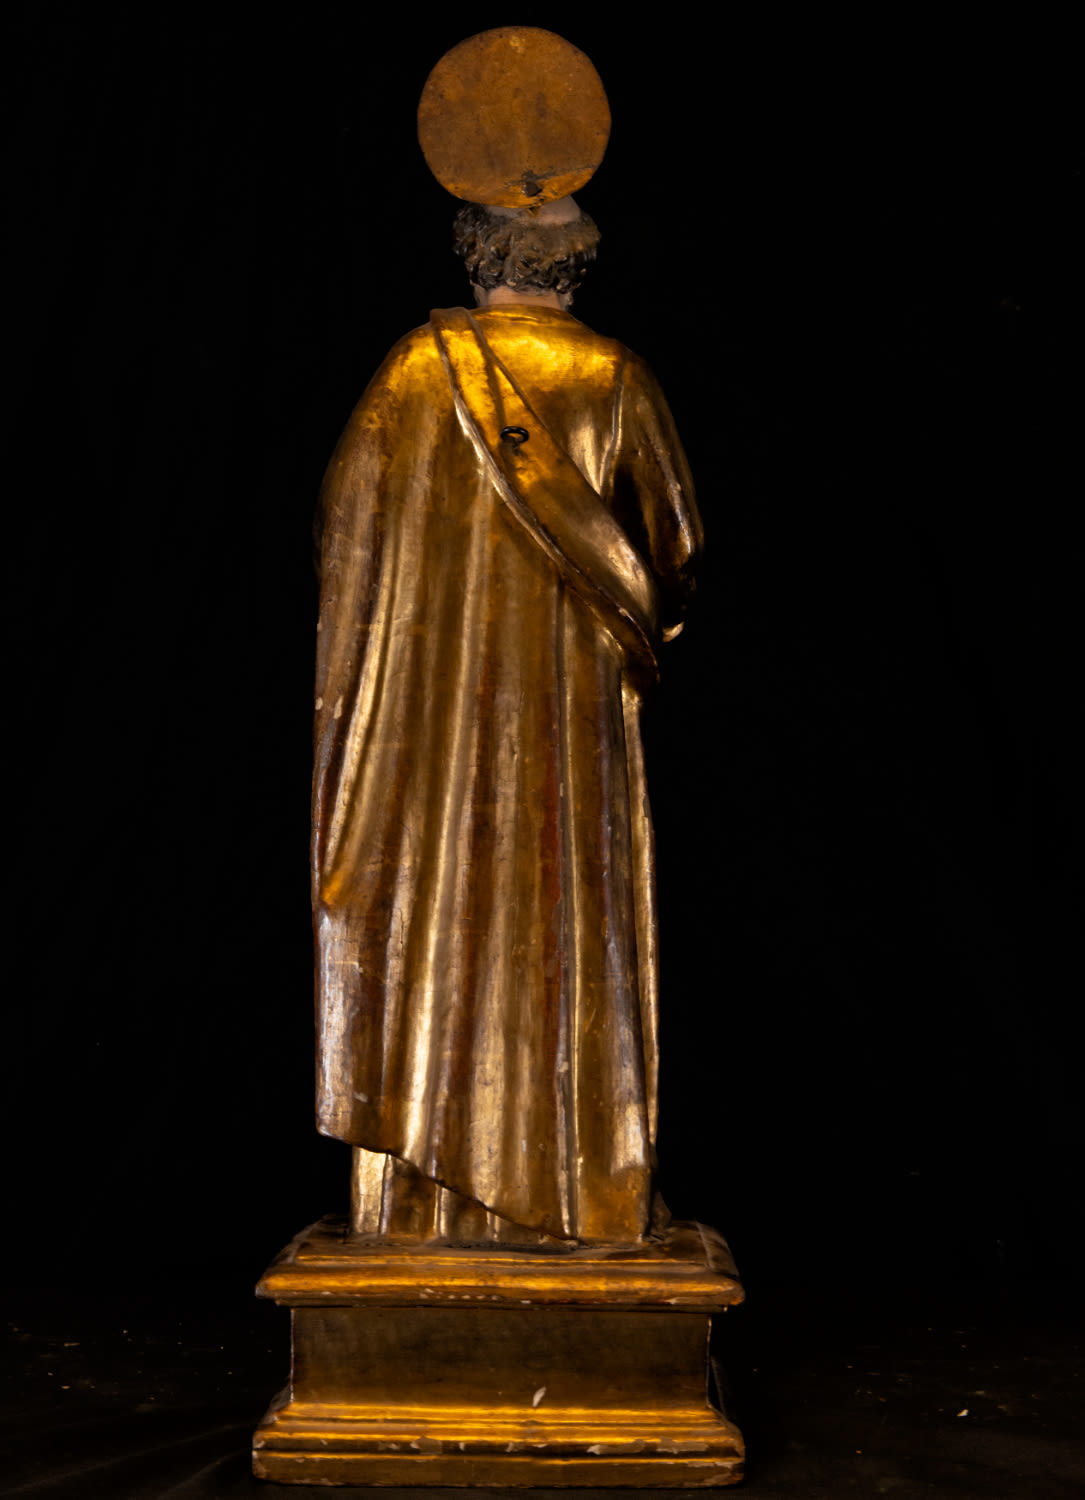 Sculpture of Saint Peter in gilded wood, Castilian school, 17th - 18th centuries - Image 4 of 4